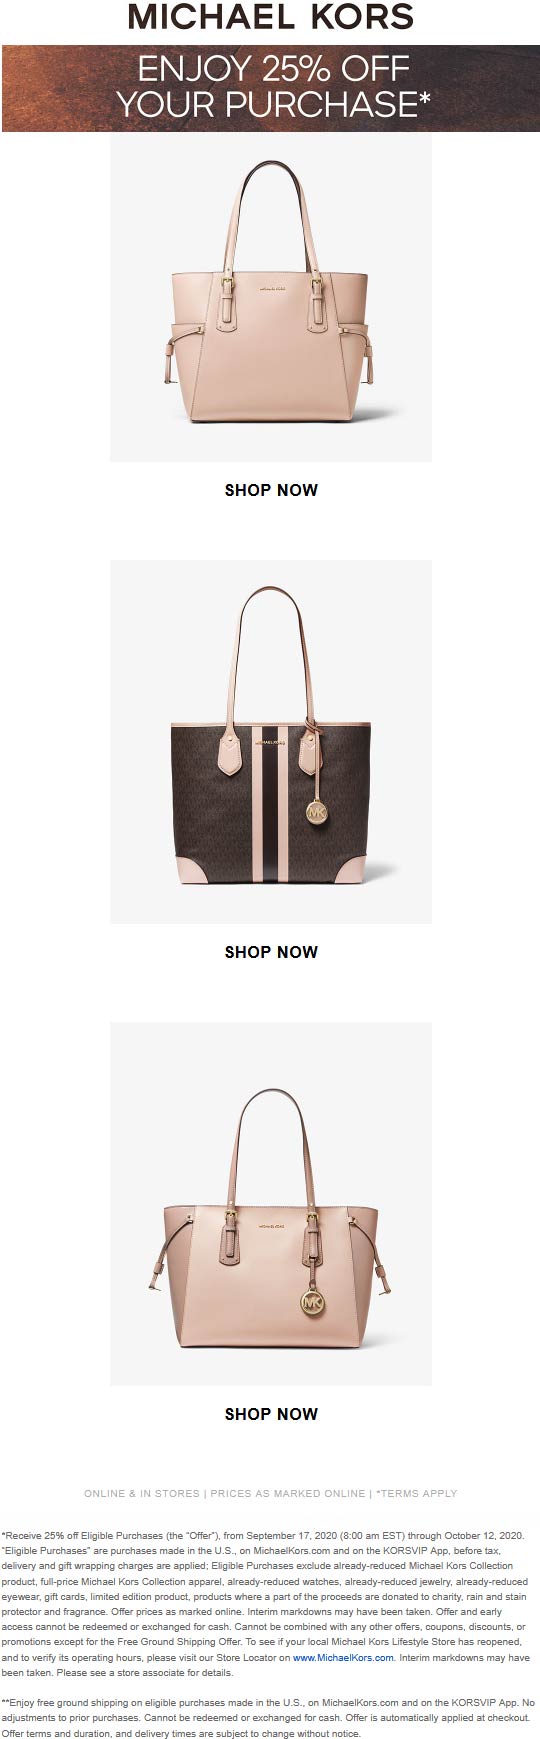 Michael Kors stores Coupon  25% off at Michael Kors, ditto online #michaelkors 